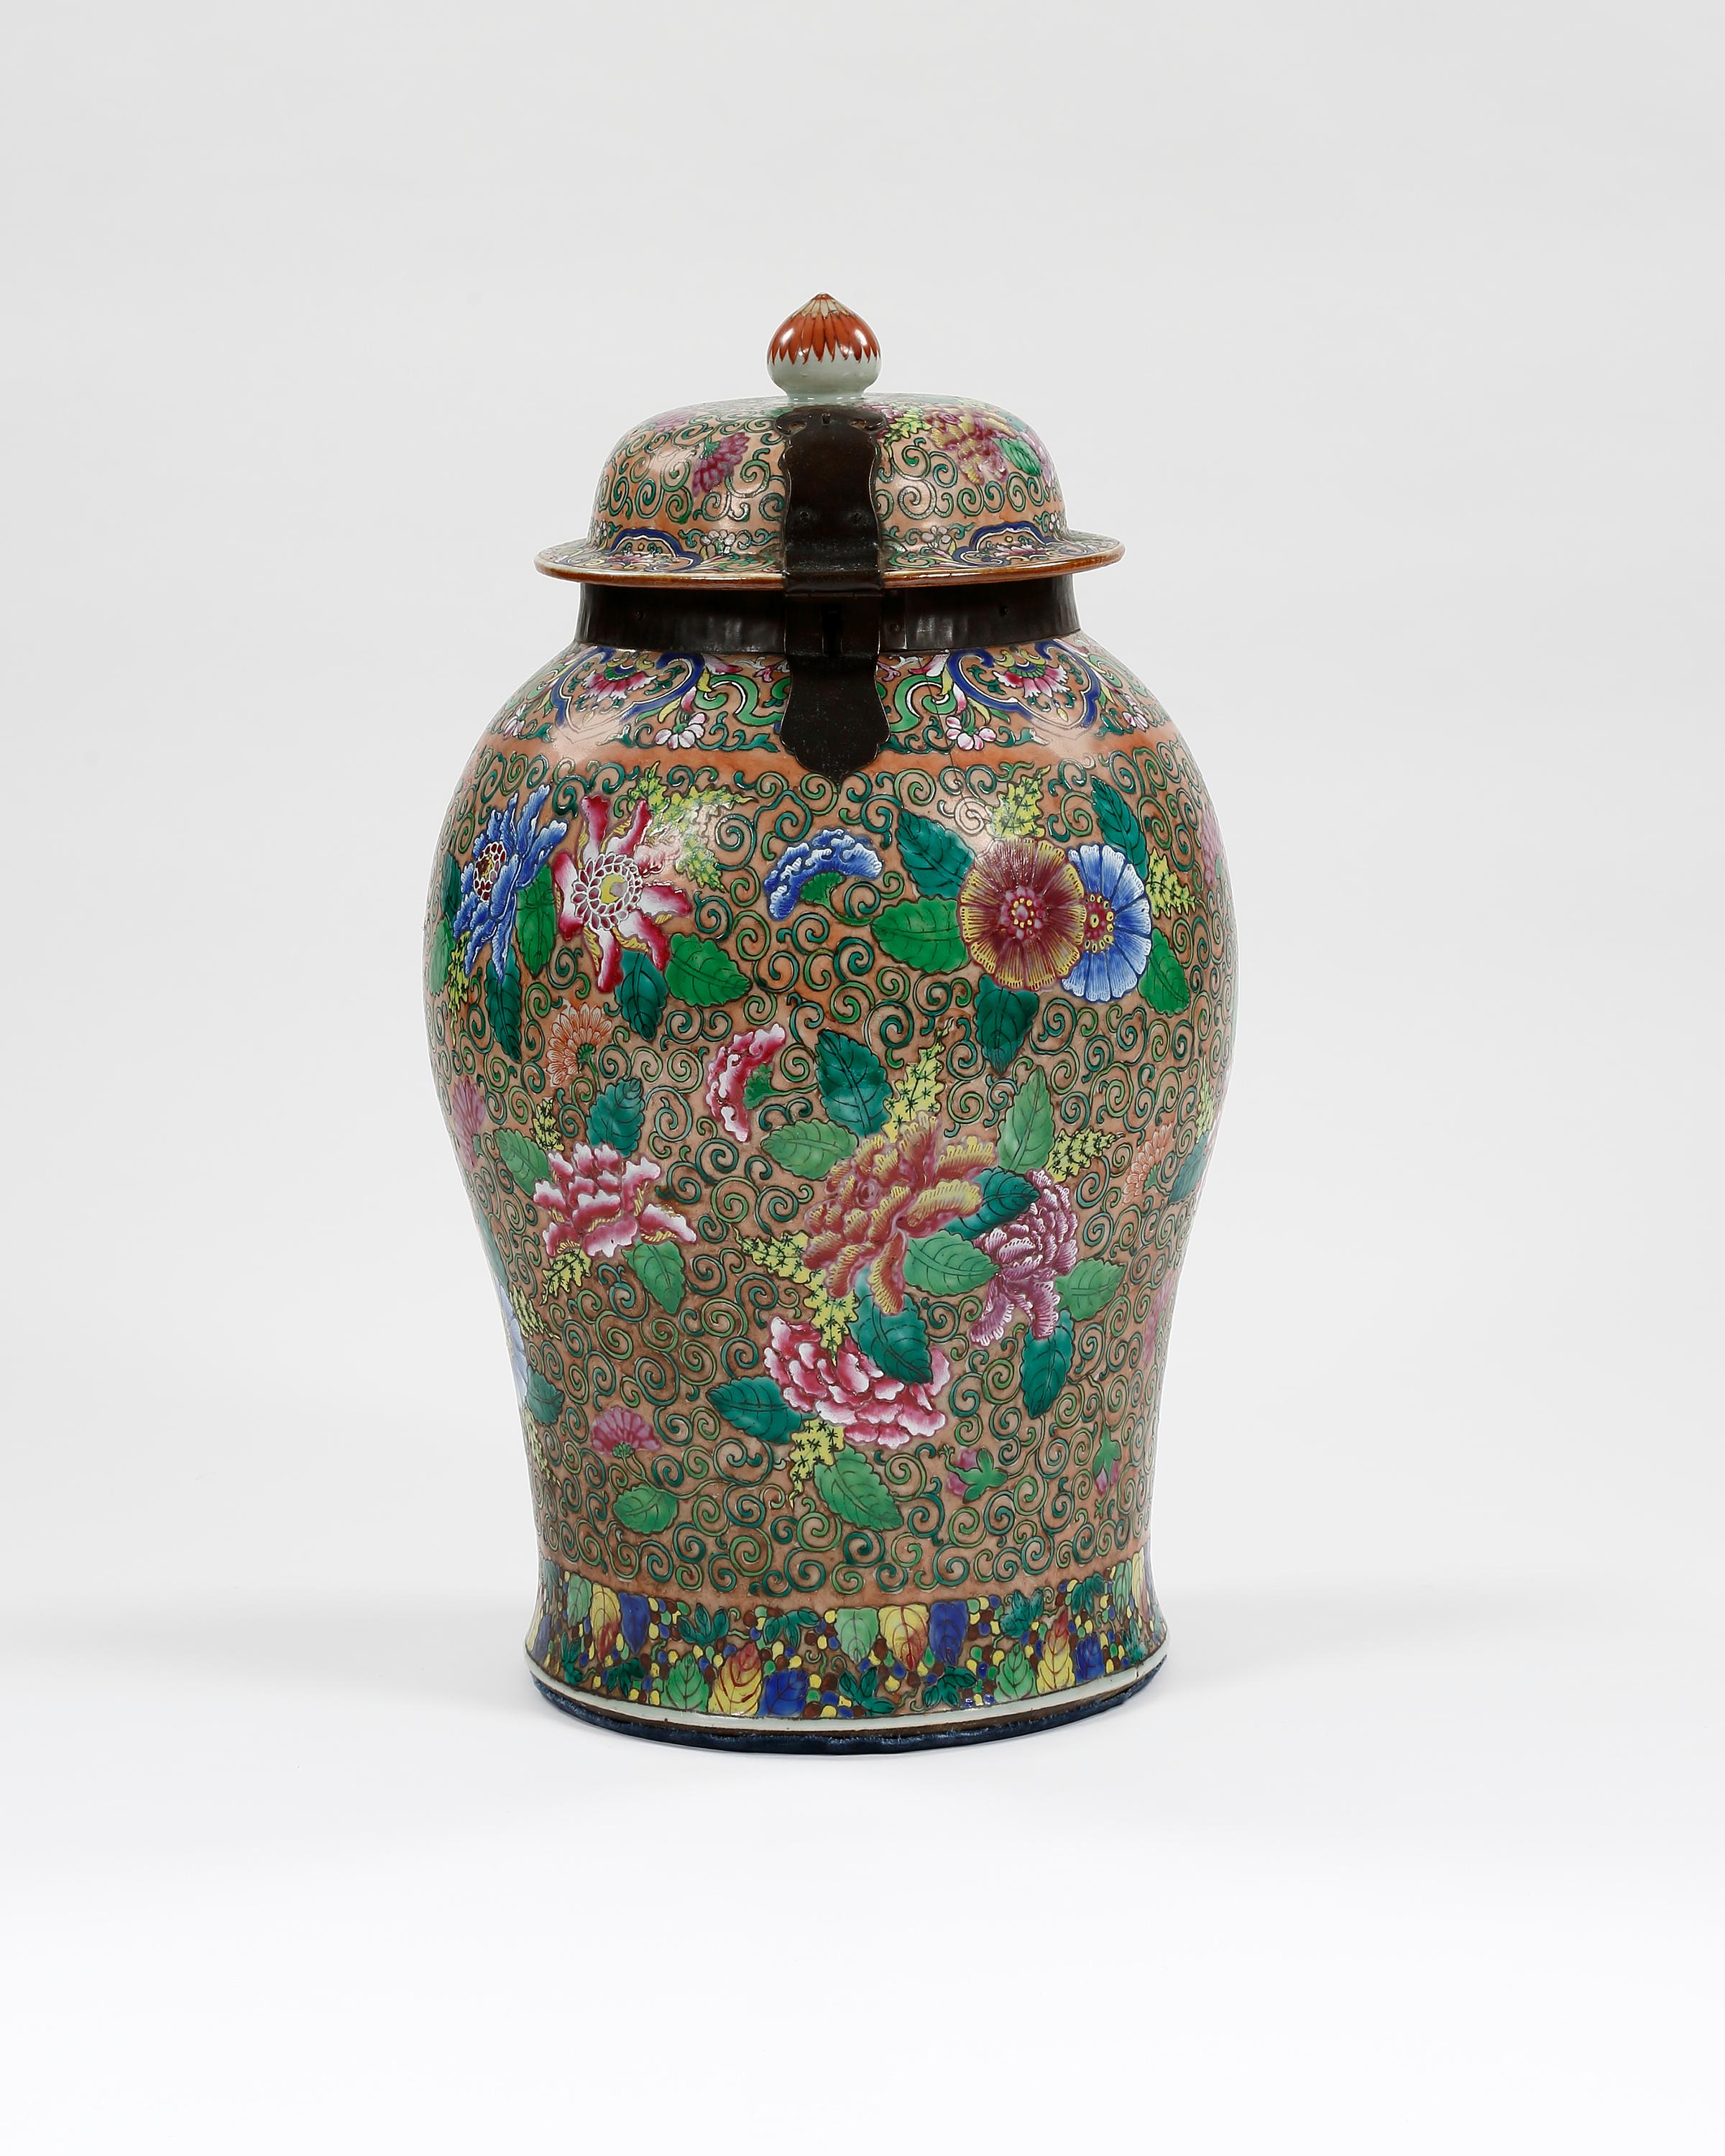 A 19th century large Chinese lidded storage jar with brass strap hinges, possibly for holding tea. Finely enamelled decoration of exotic flowers with vibrant colours of pinks, blues and greens.